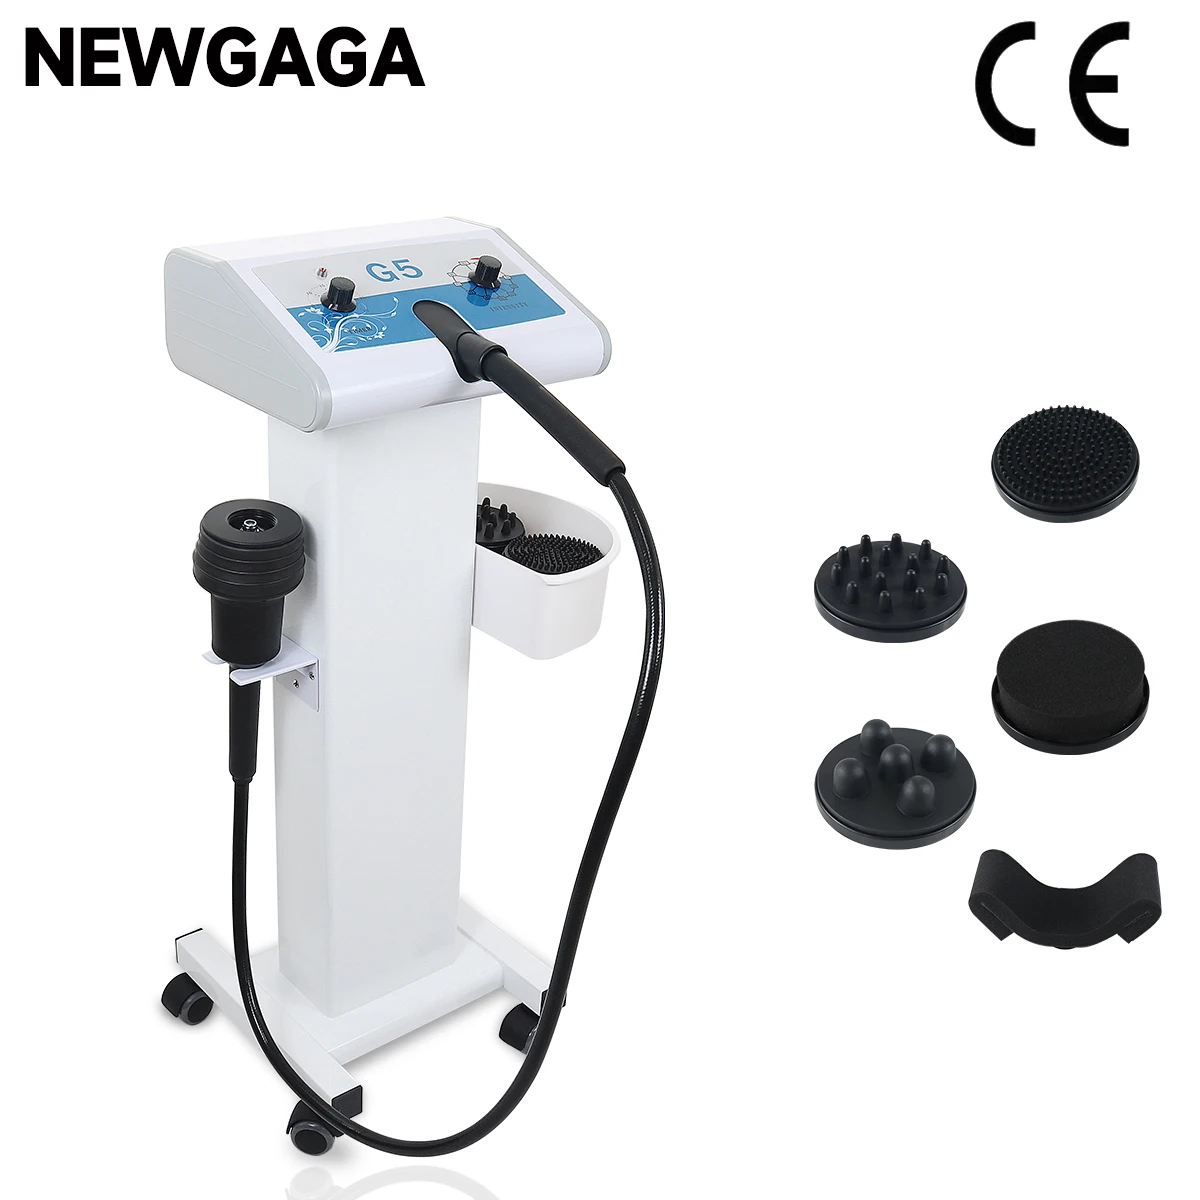 

NEW G5 Vibrating Massager Body Slimming Machine with Trolley Stand High Frequency Vibrator Fat Burner Shaping Weight Loss Device